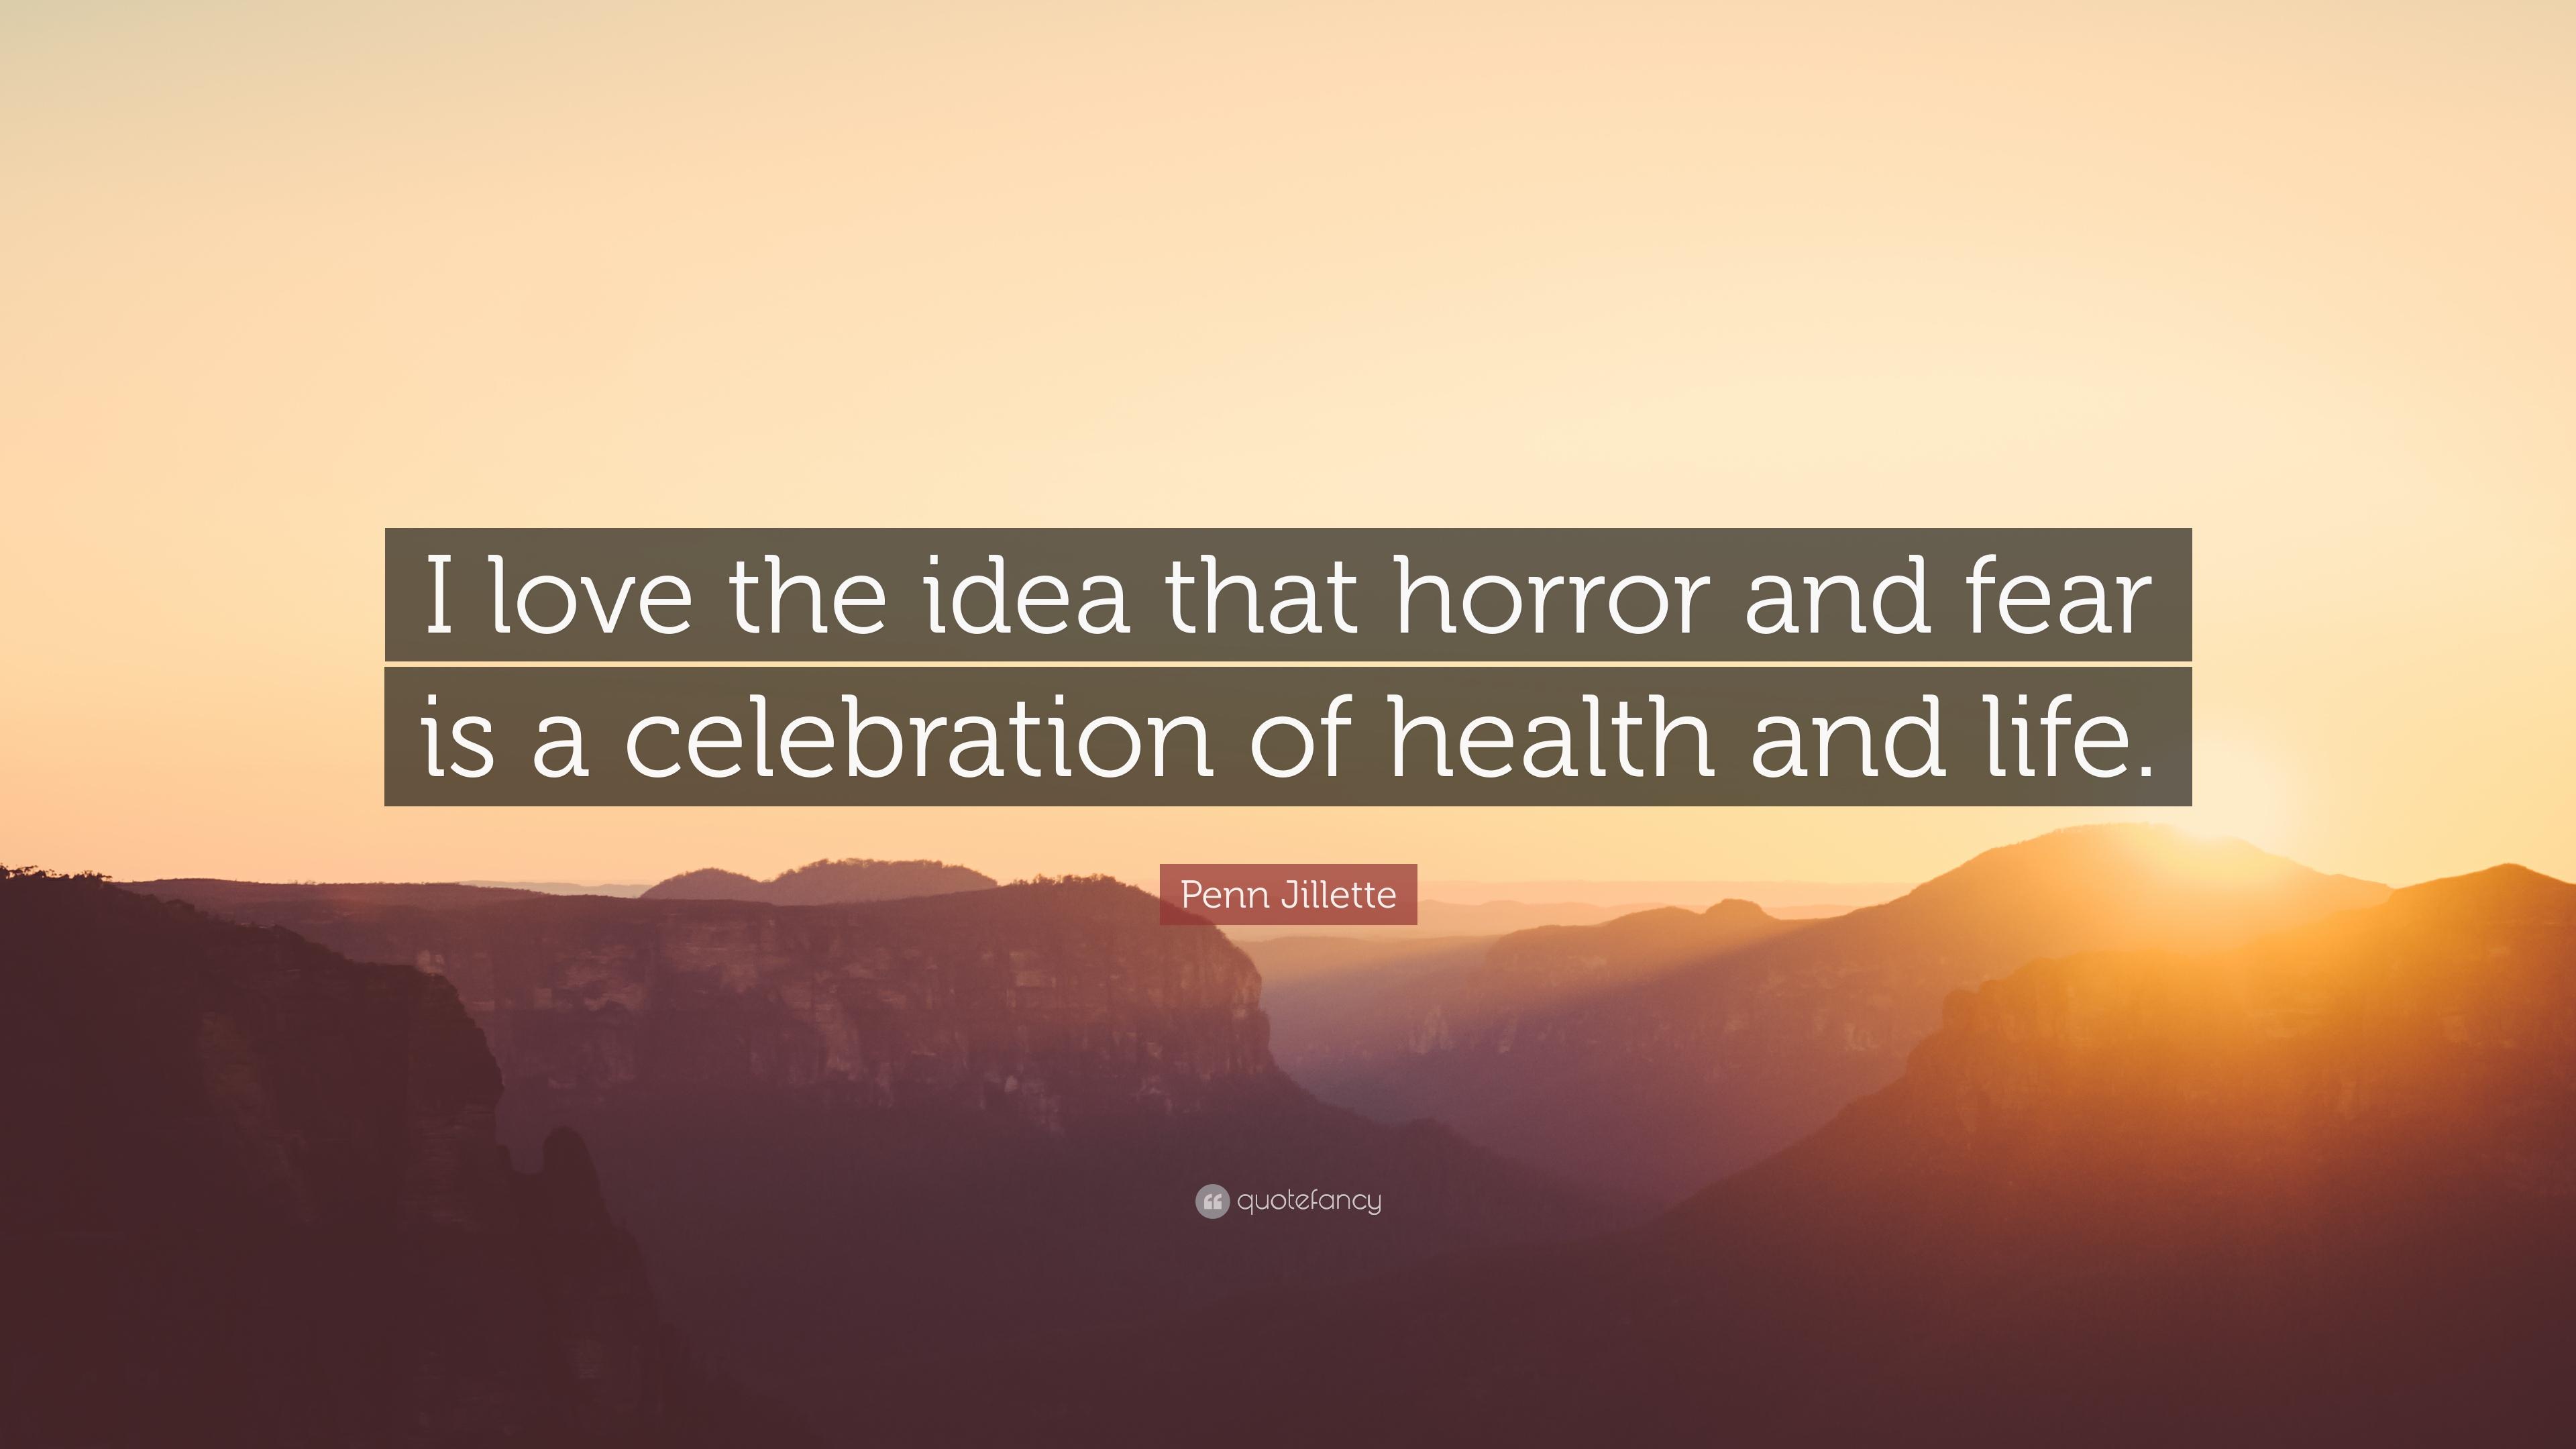 Penn Jillette Quote: “I love the idea that horror and fear is a